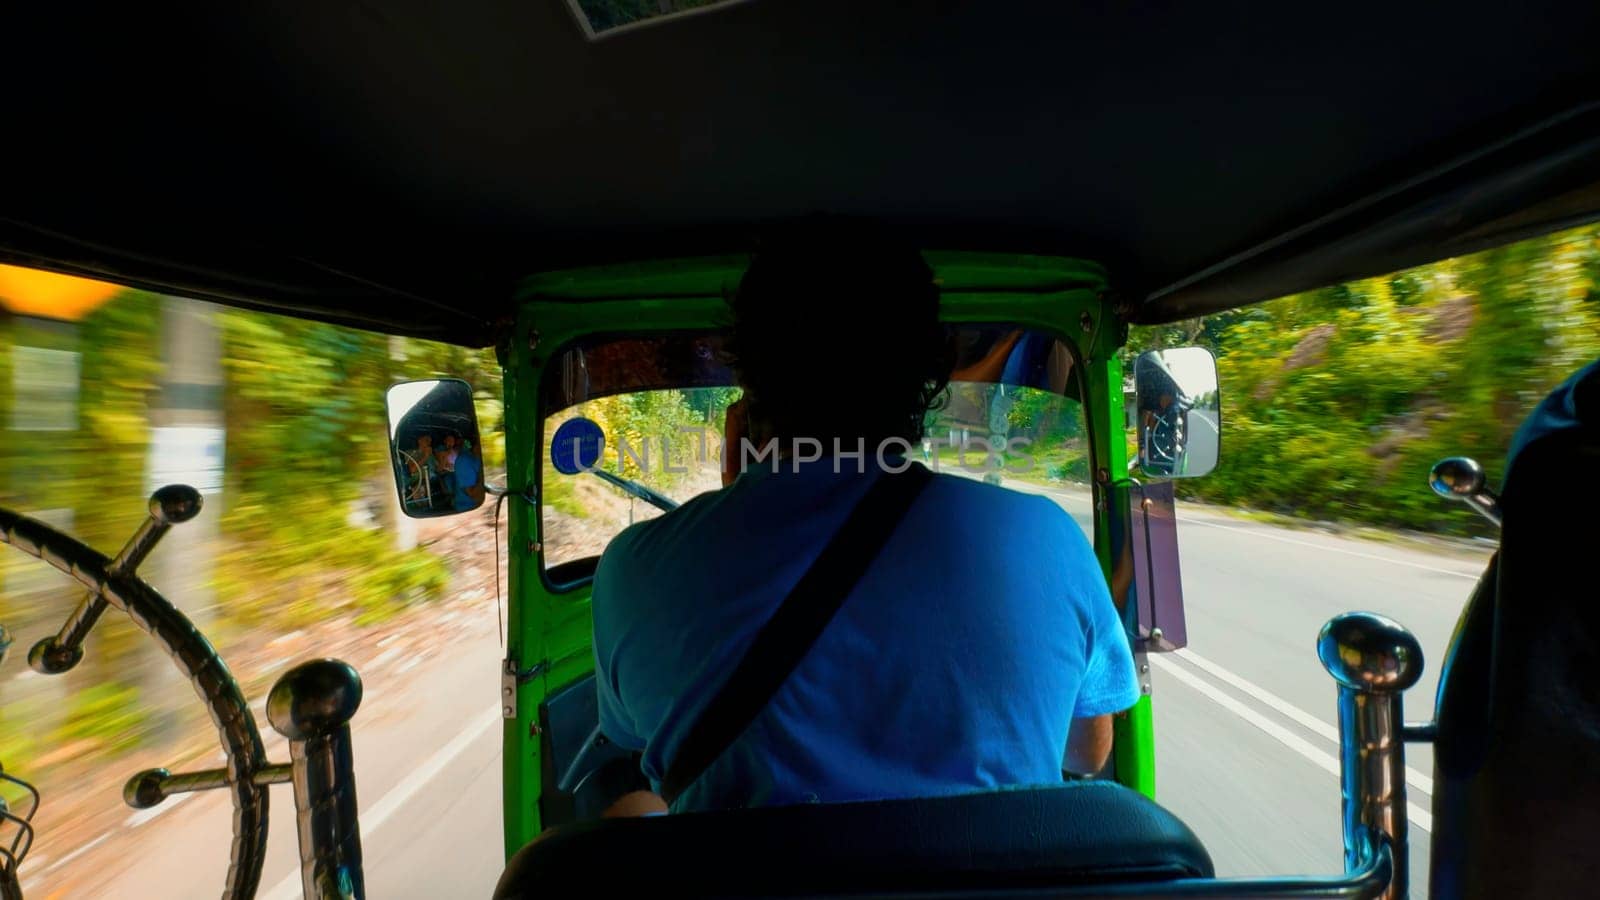 Rear view of a tuk-tuk or motorcycle driver carrying passengers along green trees and cars. Action. Concept of travelling